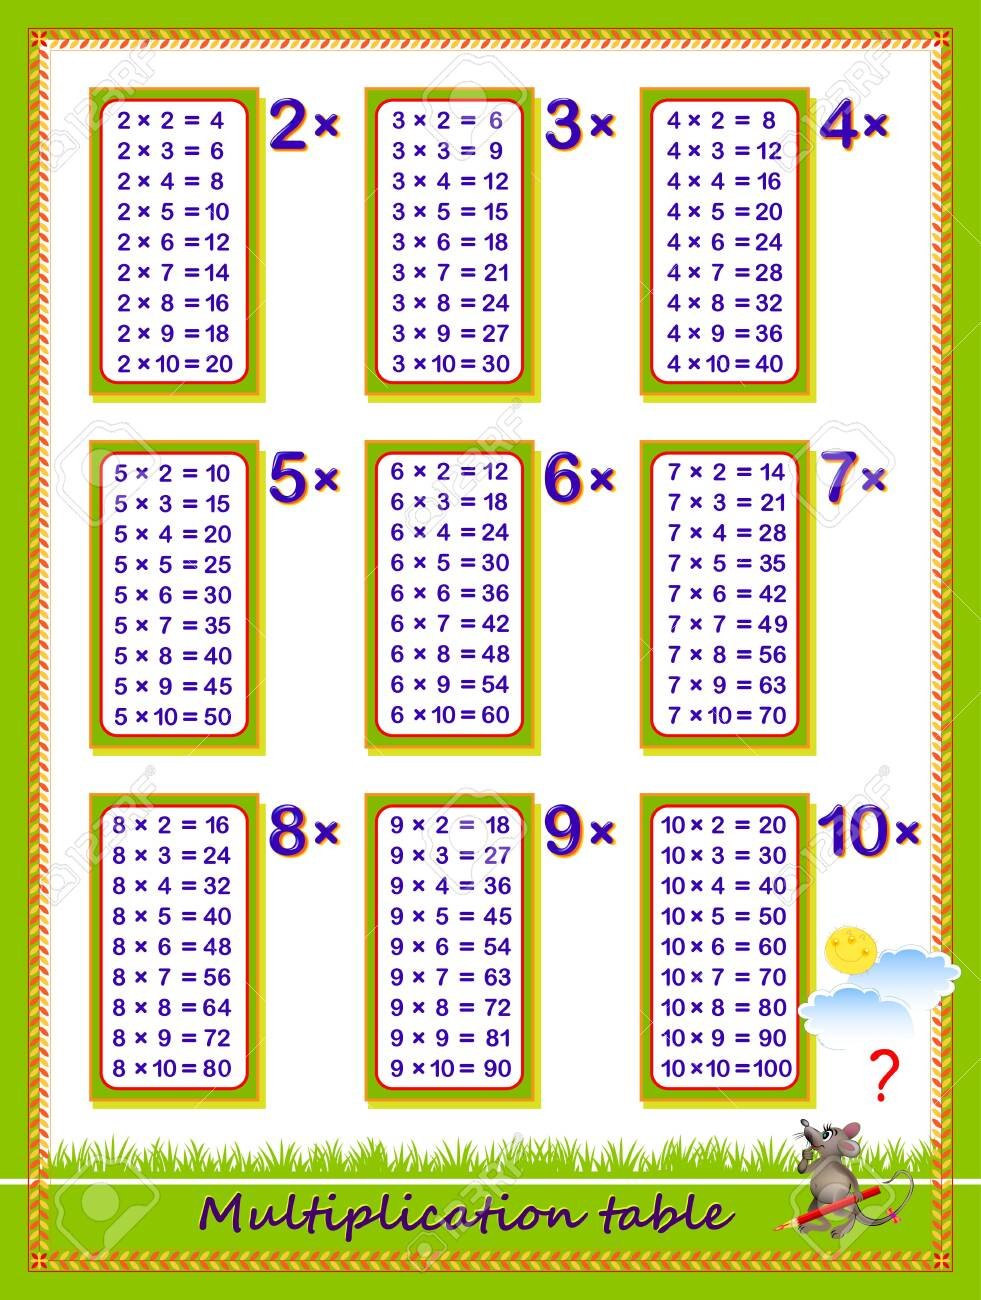 Multiplication Table For Kids. Math Education. Printable Poster..